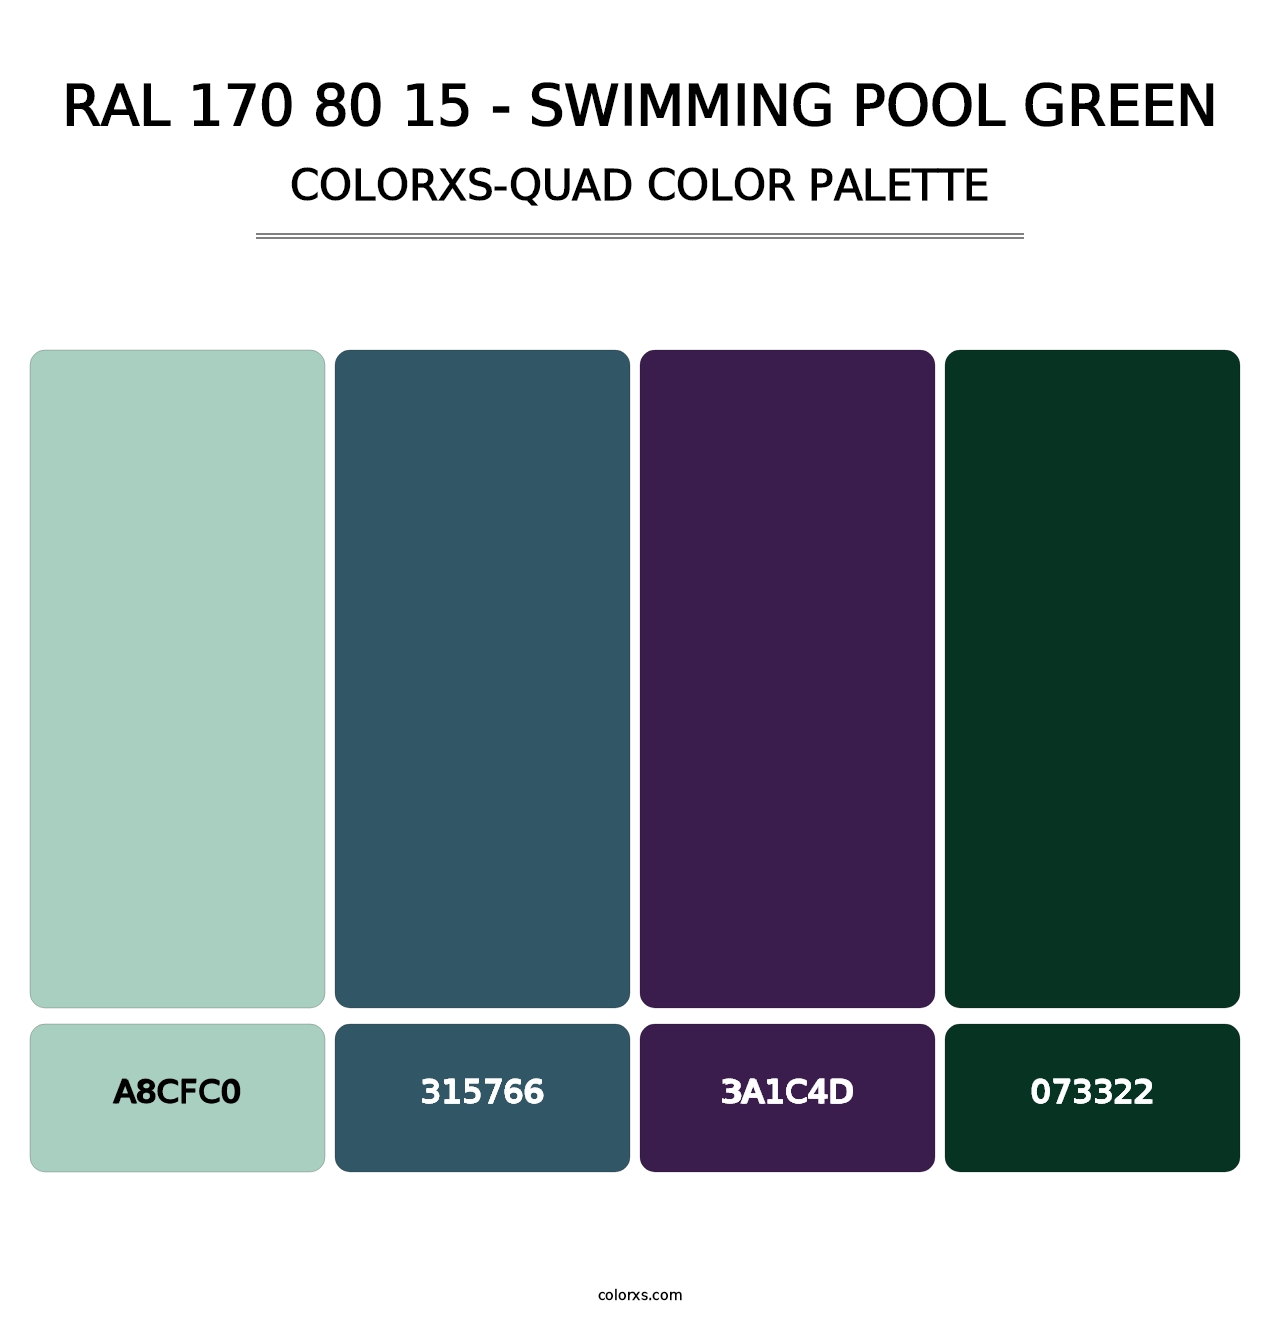 RAL 170 80 15 - Swimming Pool Green - Colorxs Quad Palette